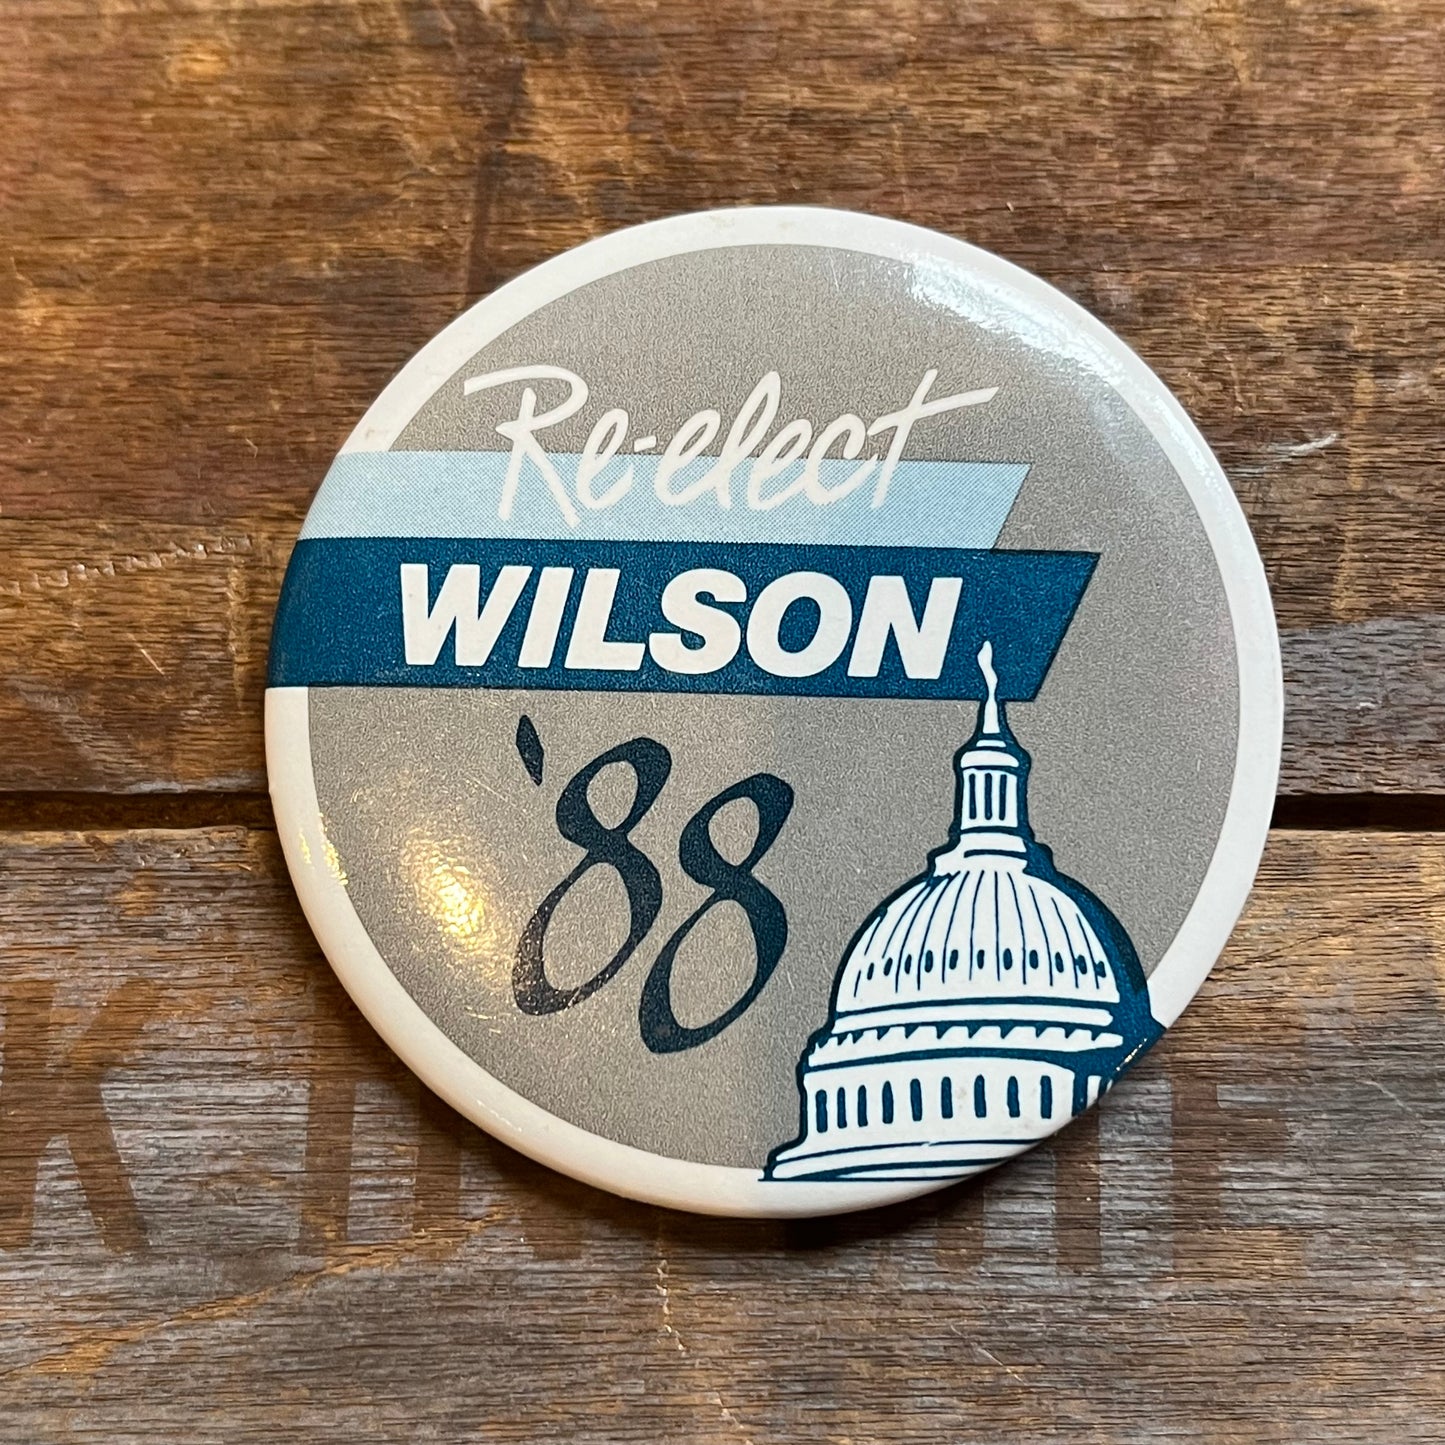 【USA vintage】缶バッジ　Re-elect WILSON ‘88